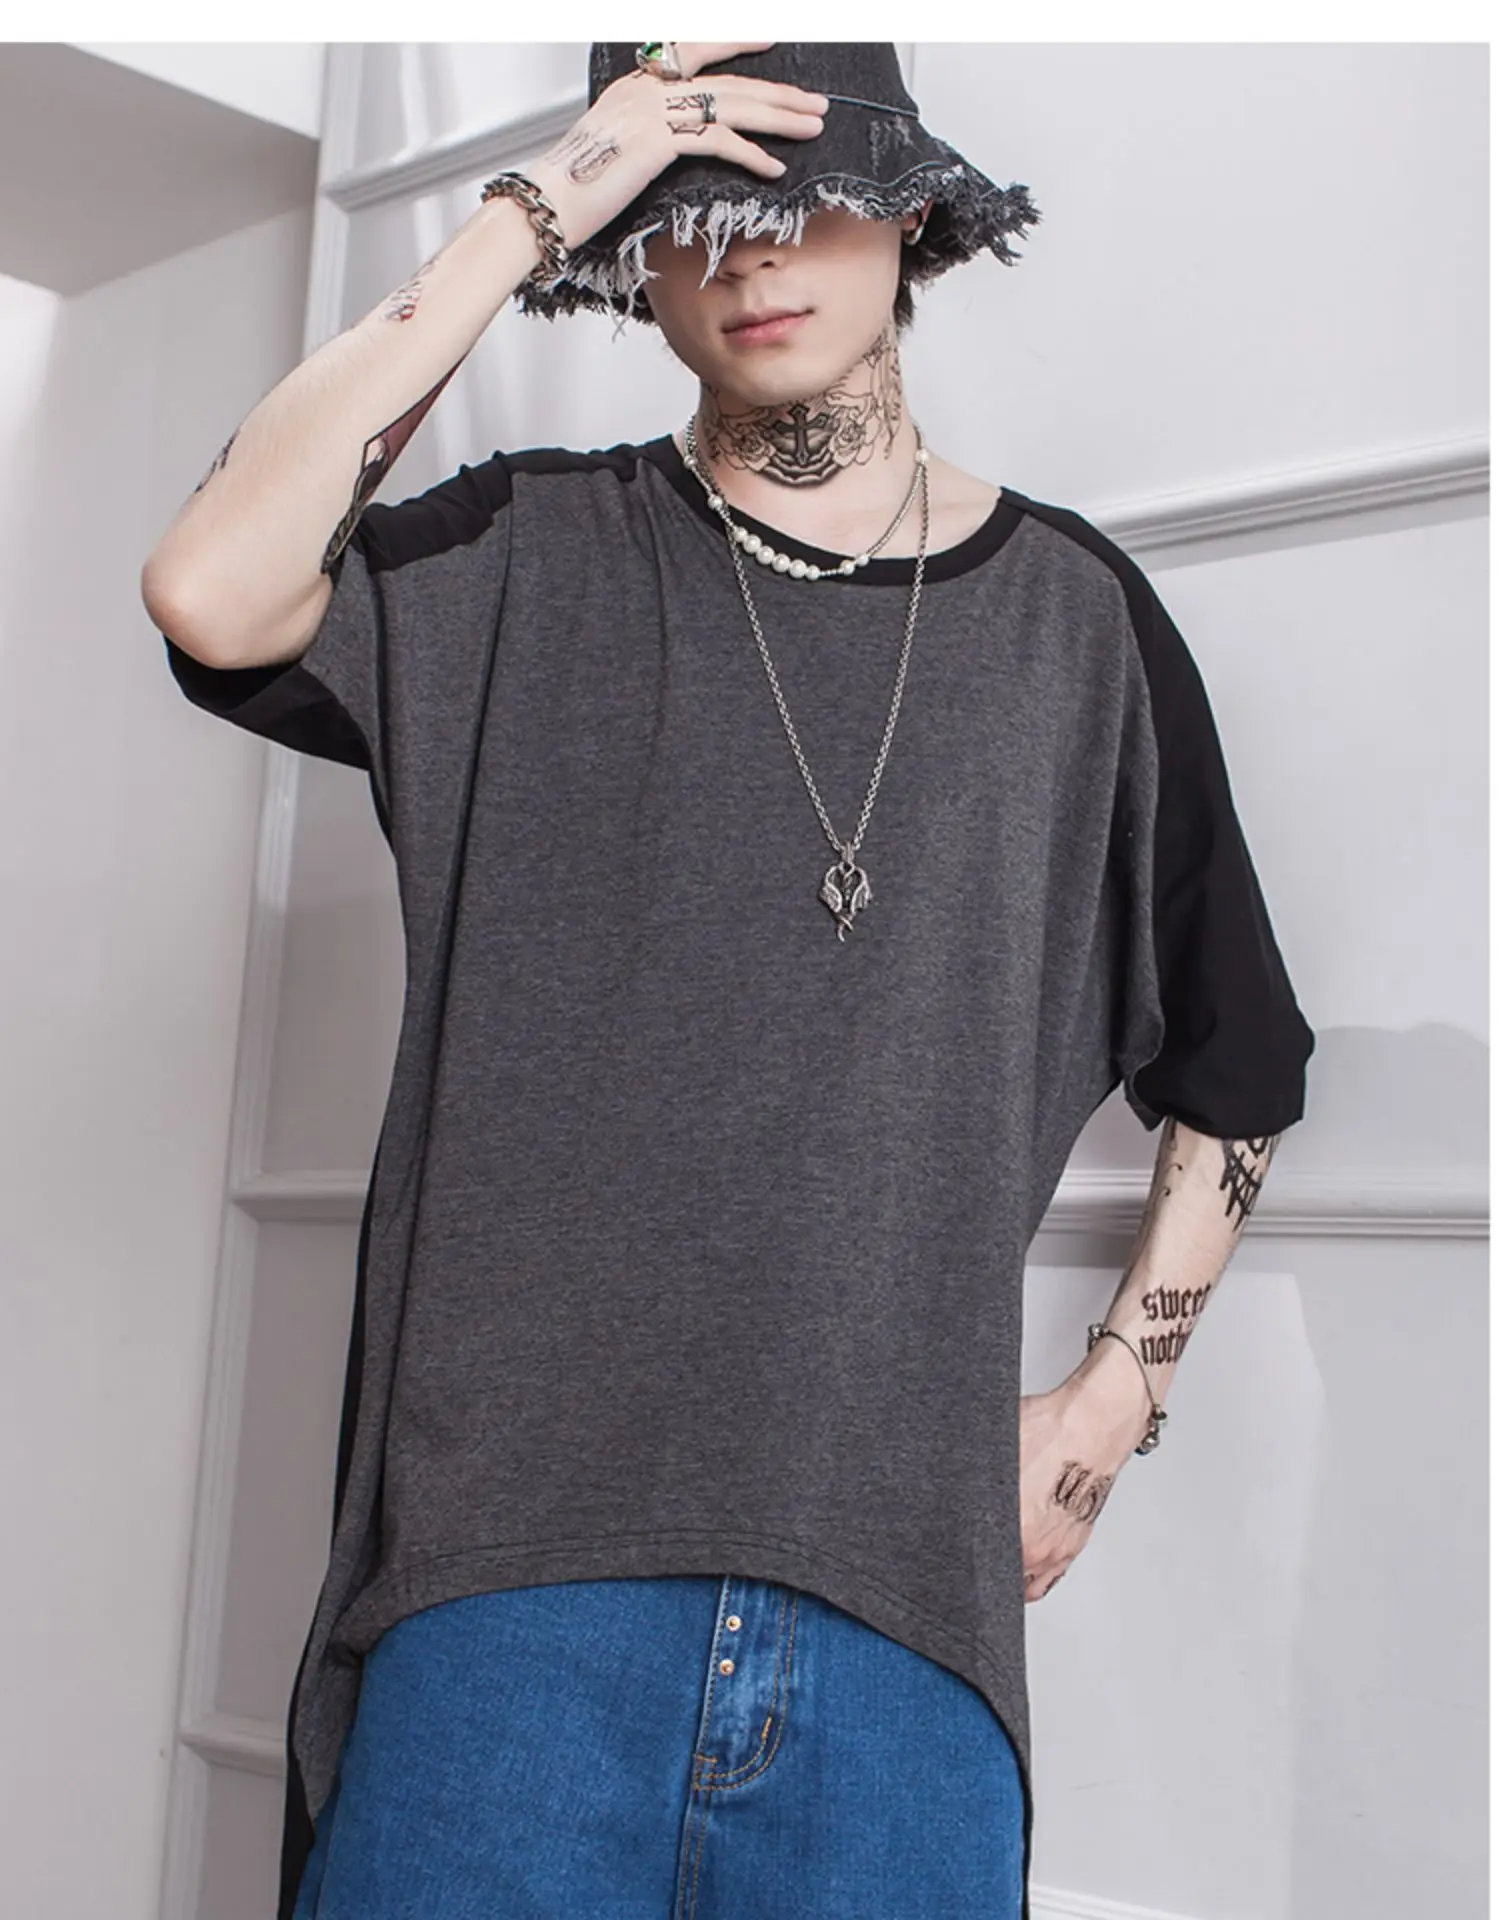 

Men's T-shirt summer wear patchwork bat T-shirt with loose round neck with five-minute sleeves and irregular bottom hem